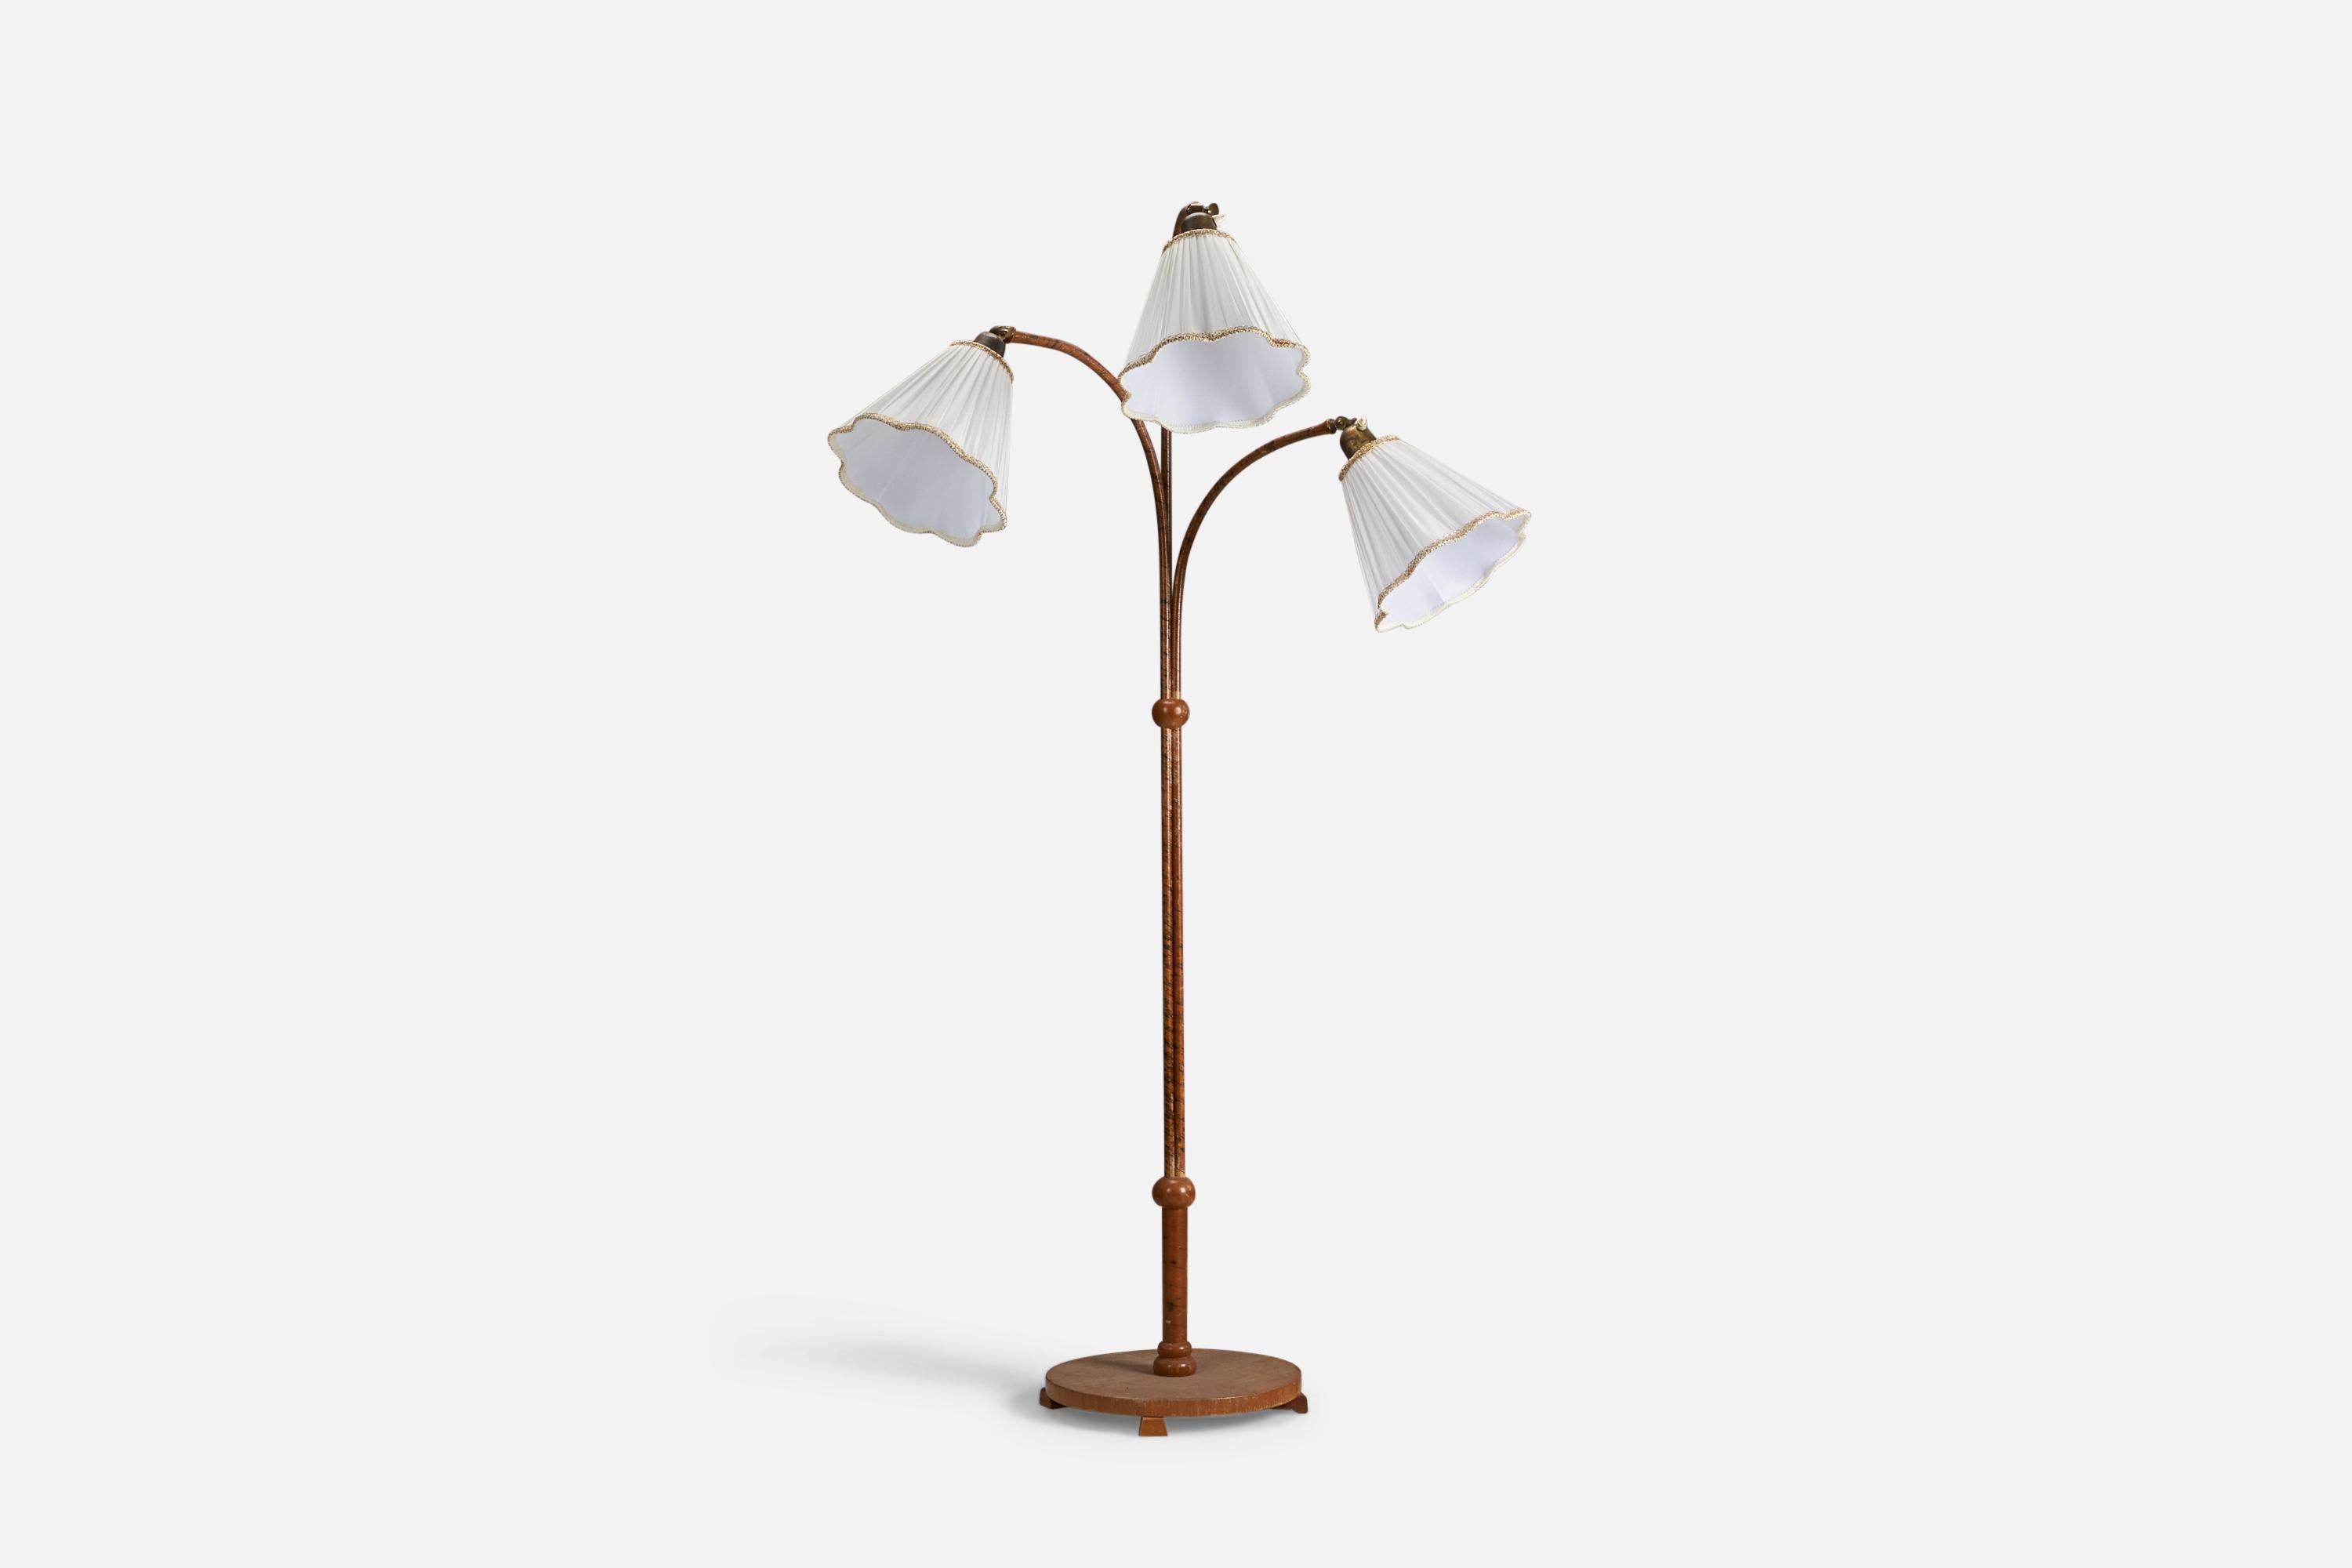 A wood, wood veneer, brass and fabric floor lamp designed and produced by a Swedish Designer, Sweden, 1940s.

Sockets take standard E-26 medium base bulbs.

There is no maximum wattage stated on the fixture.